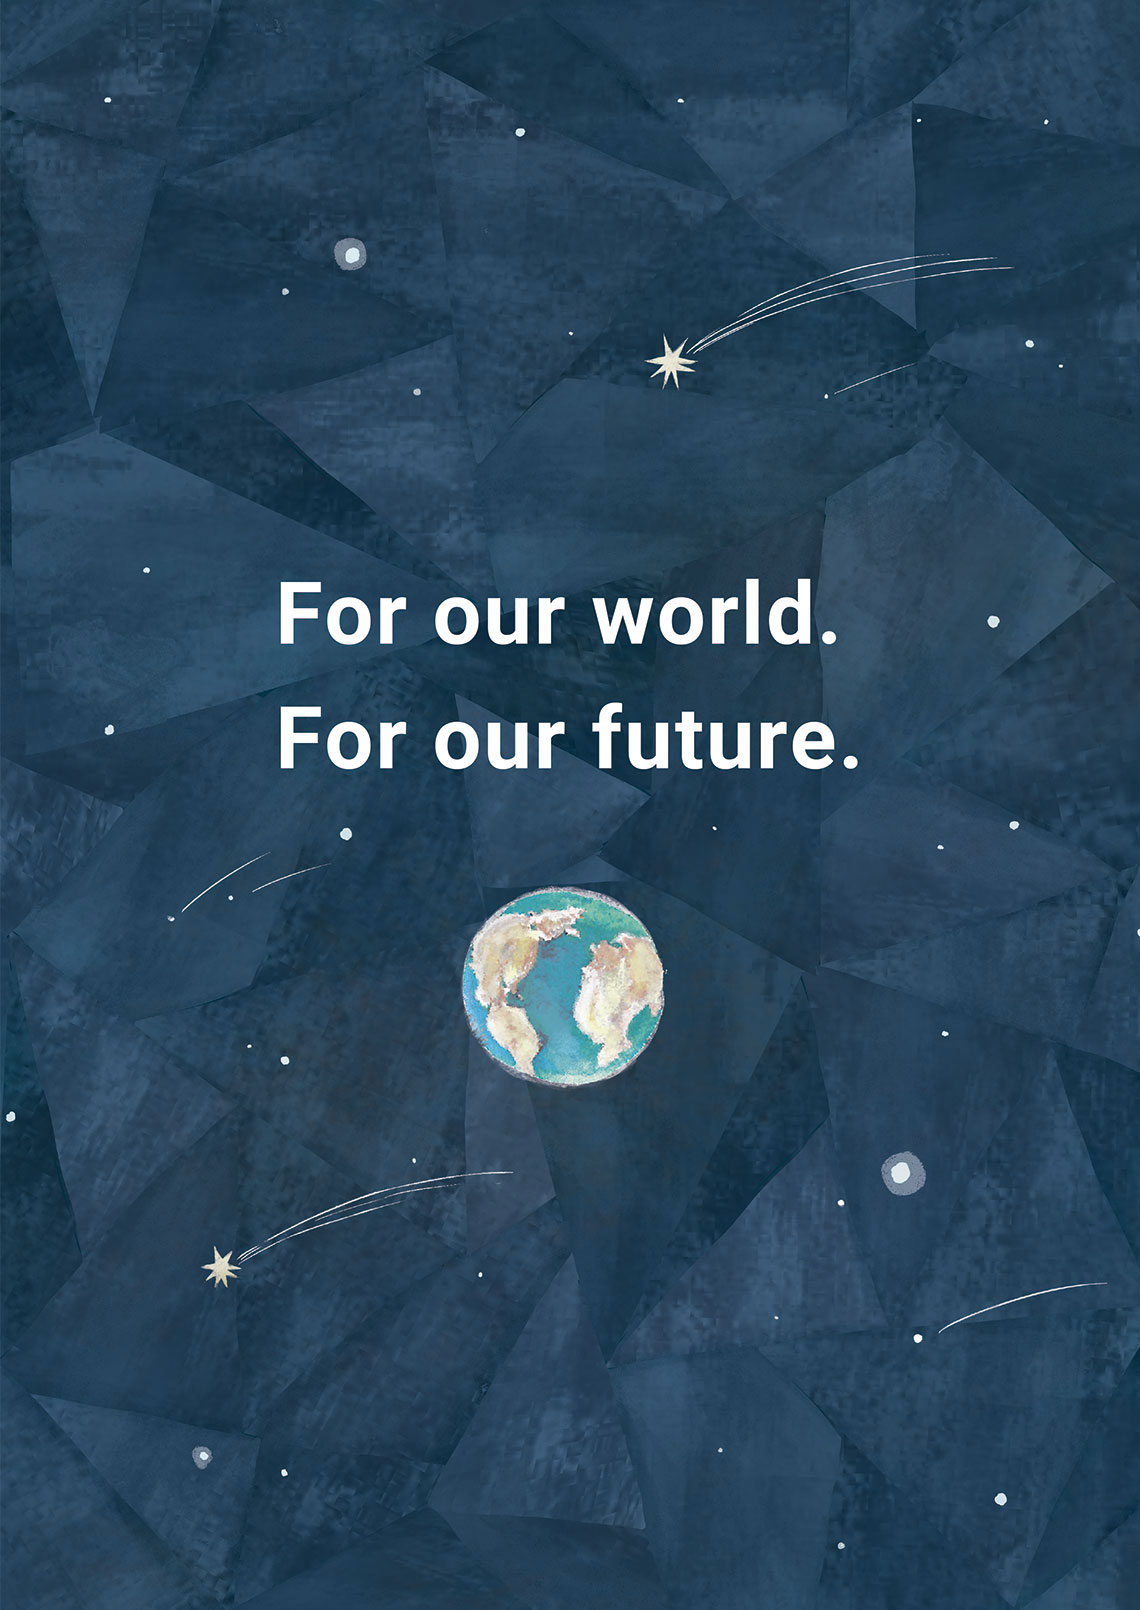 For our world. For our future.